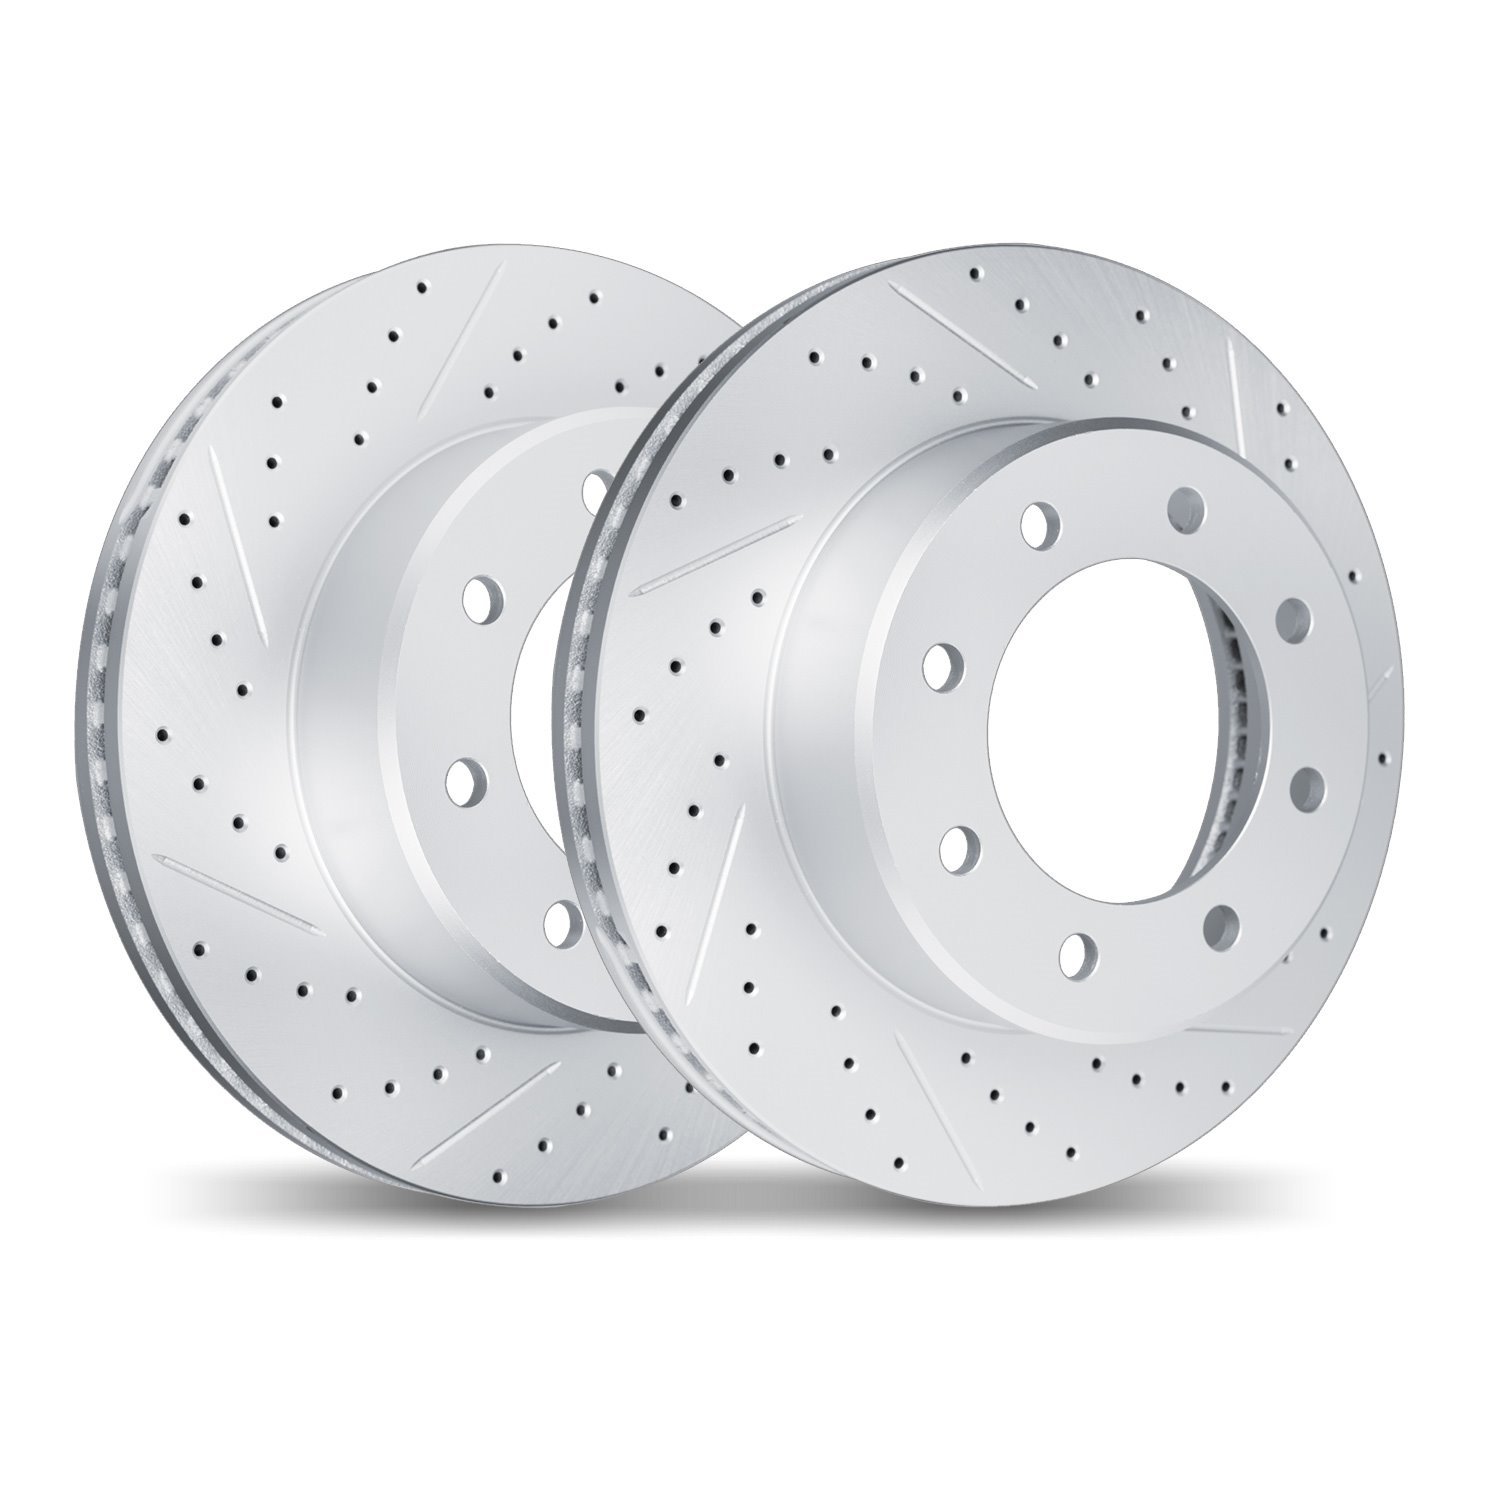 2002-48046 Geoperformance Drilled/Slotted Brake Rotors, Fits Select GM, Position: Rear